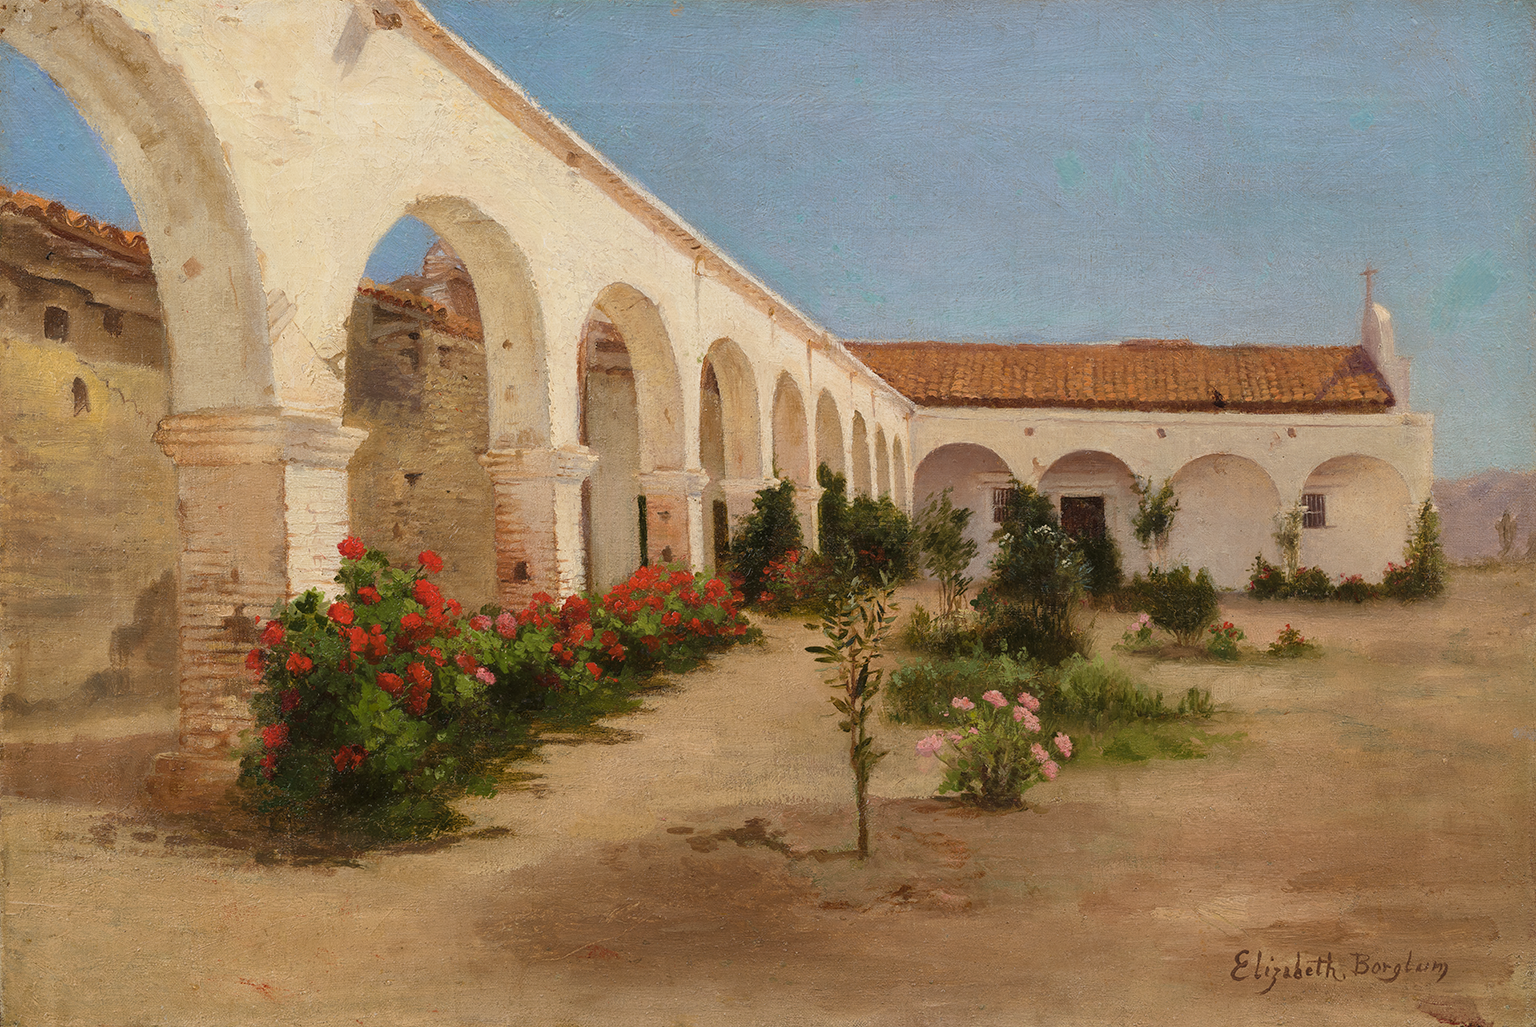 Elizabeth Jaynes Borglum, Facade of Mission San Juan Capistrano, circa 1895, Oil on canvas, 15 x 22 in. UCI Jack and Shanaz Langson Institute and Museum of California Art, Gift of The Irvine Museum